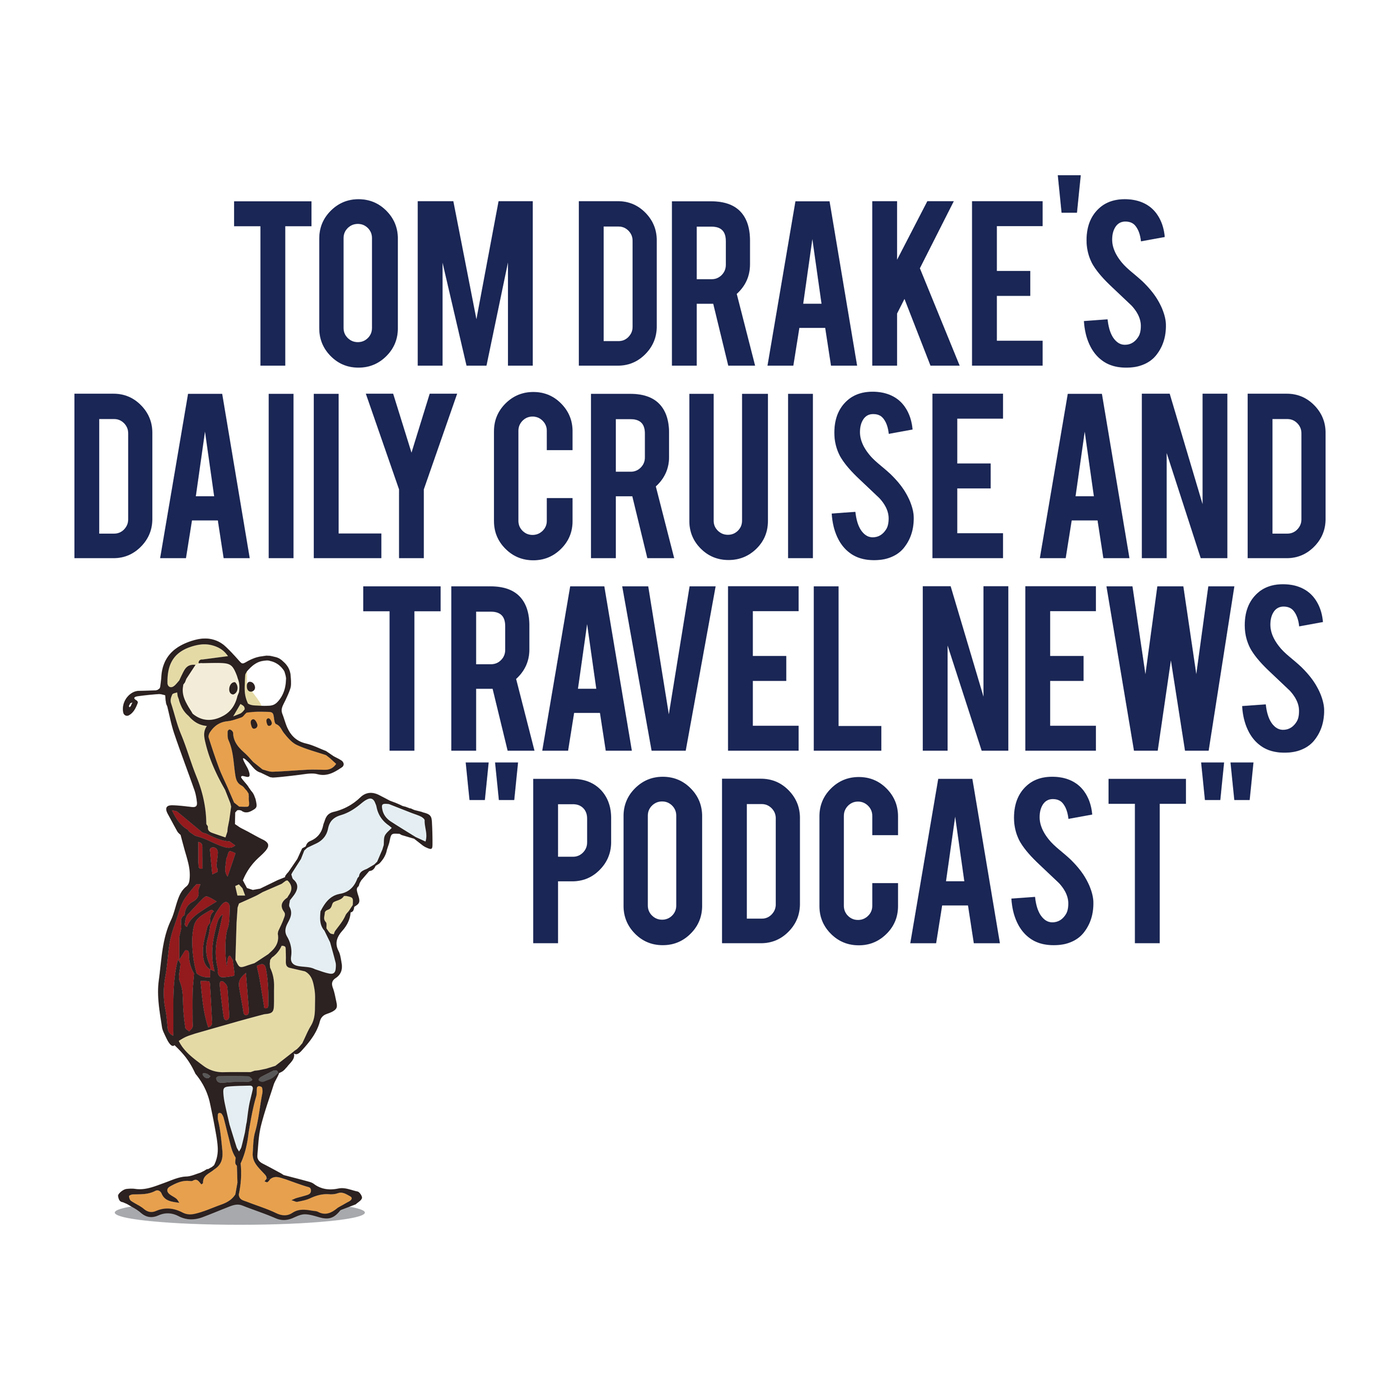 Podcast for January 17, 2022. AIDA crew will get more money and better benefits!